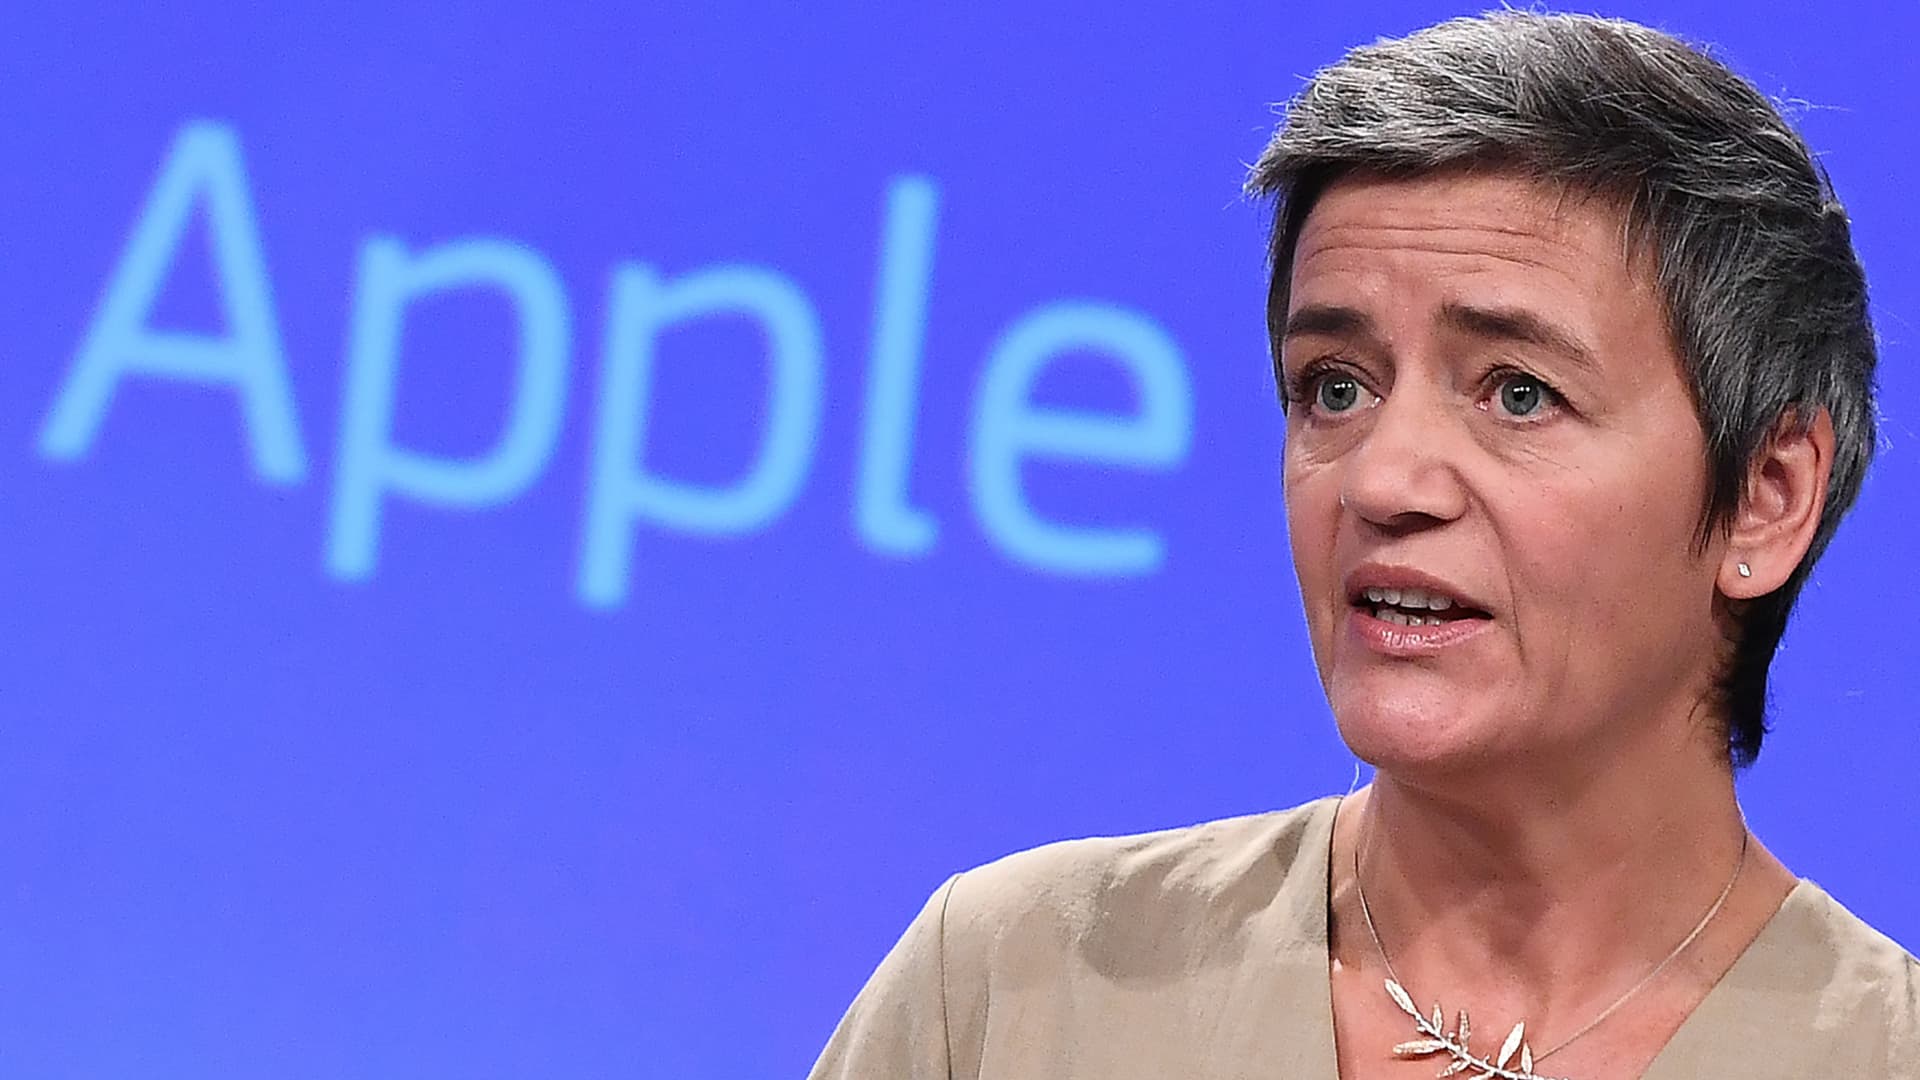 EU launches antitrust probes into Apple's App Store and Apple Pay